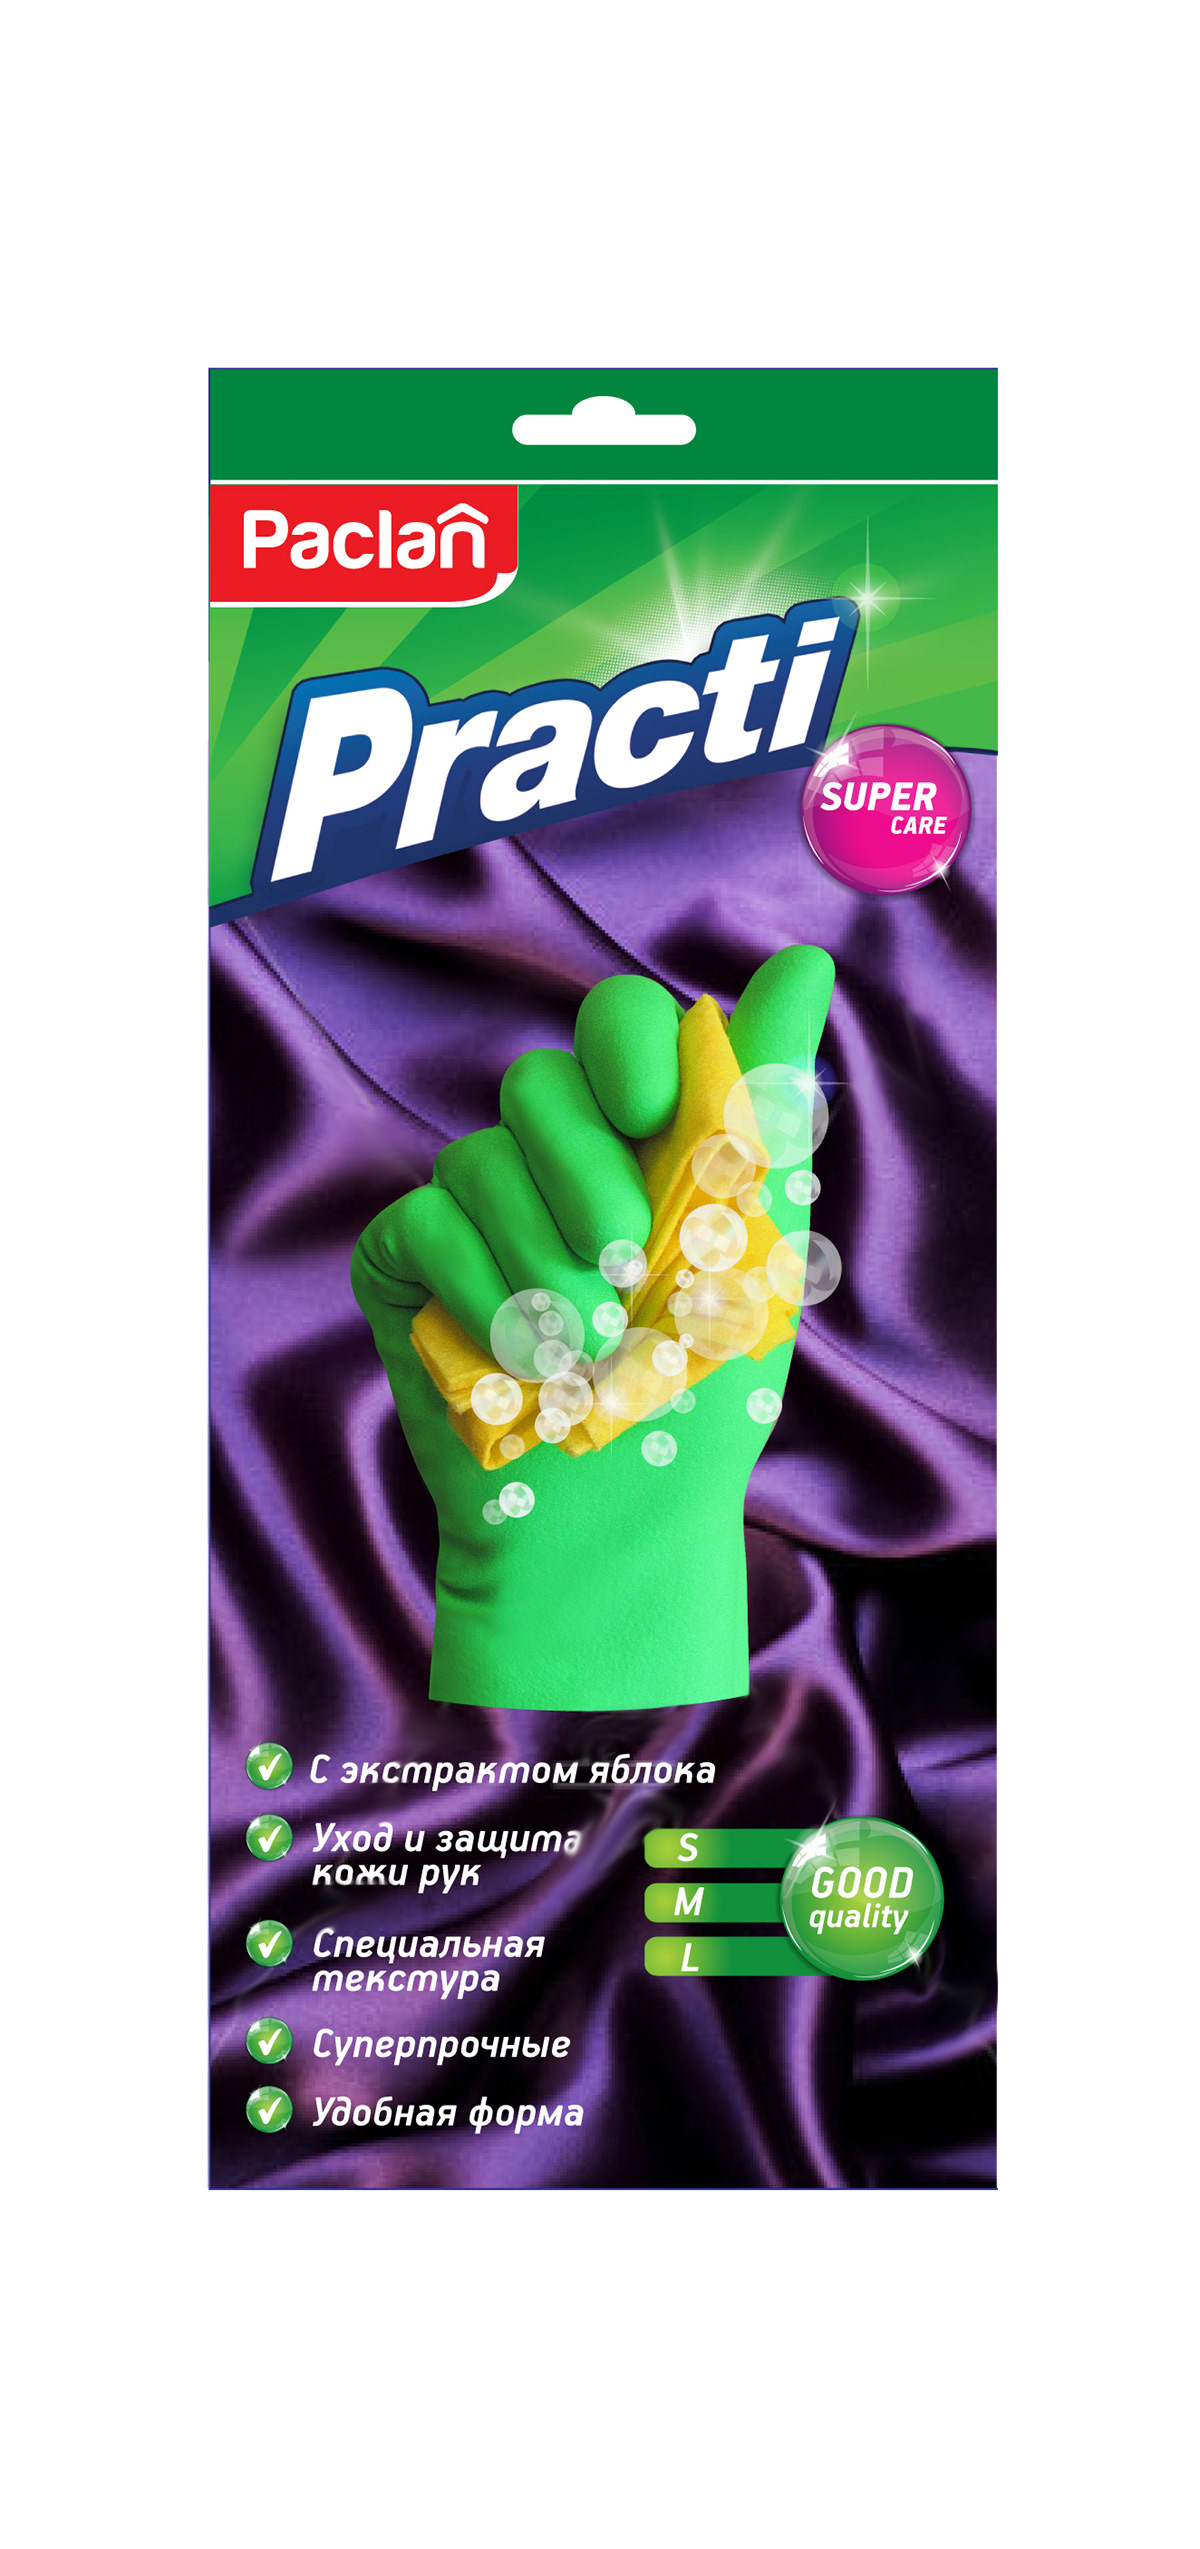 package rubber gloves